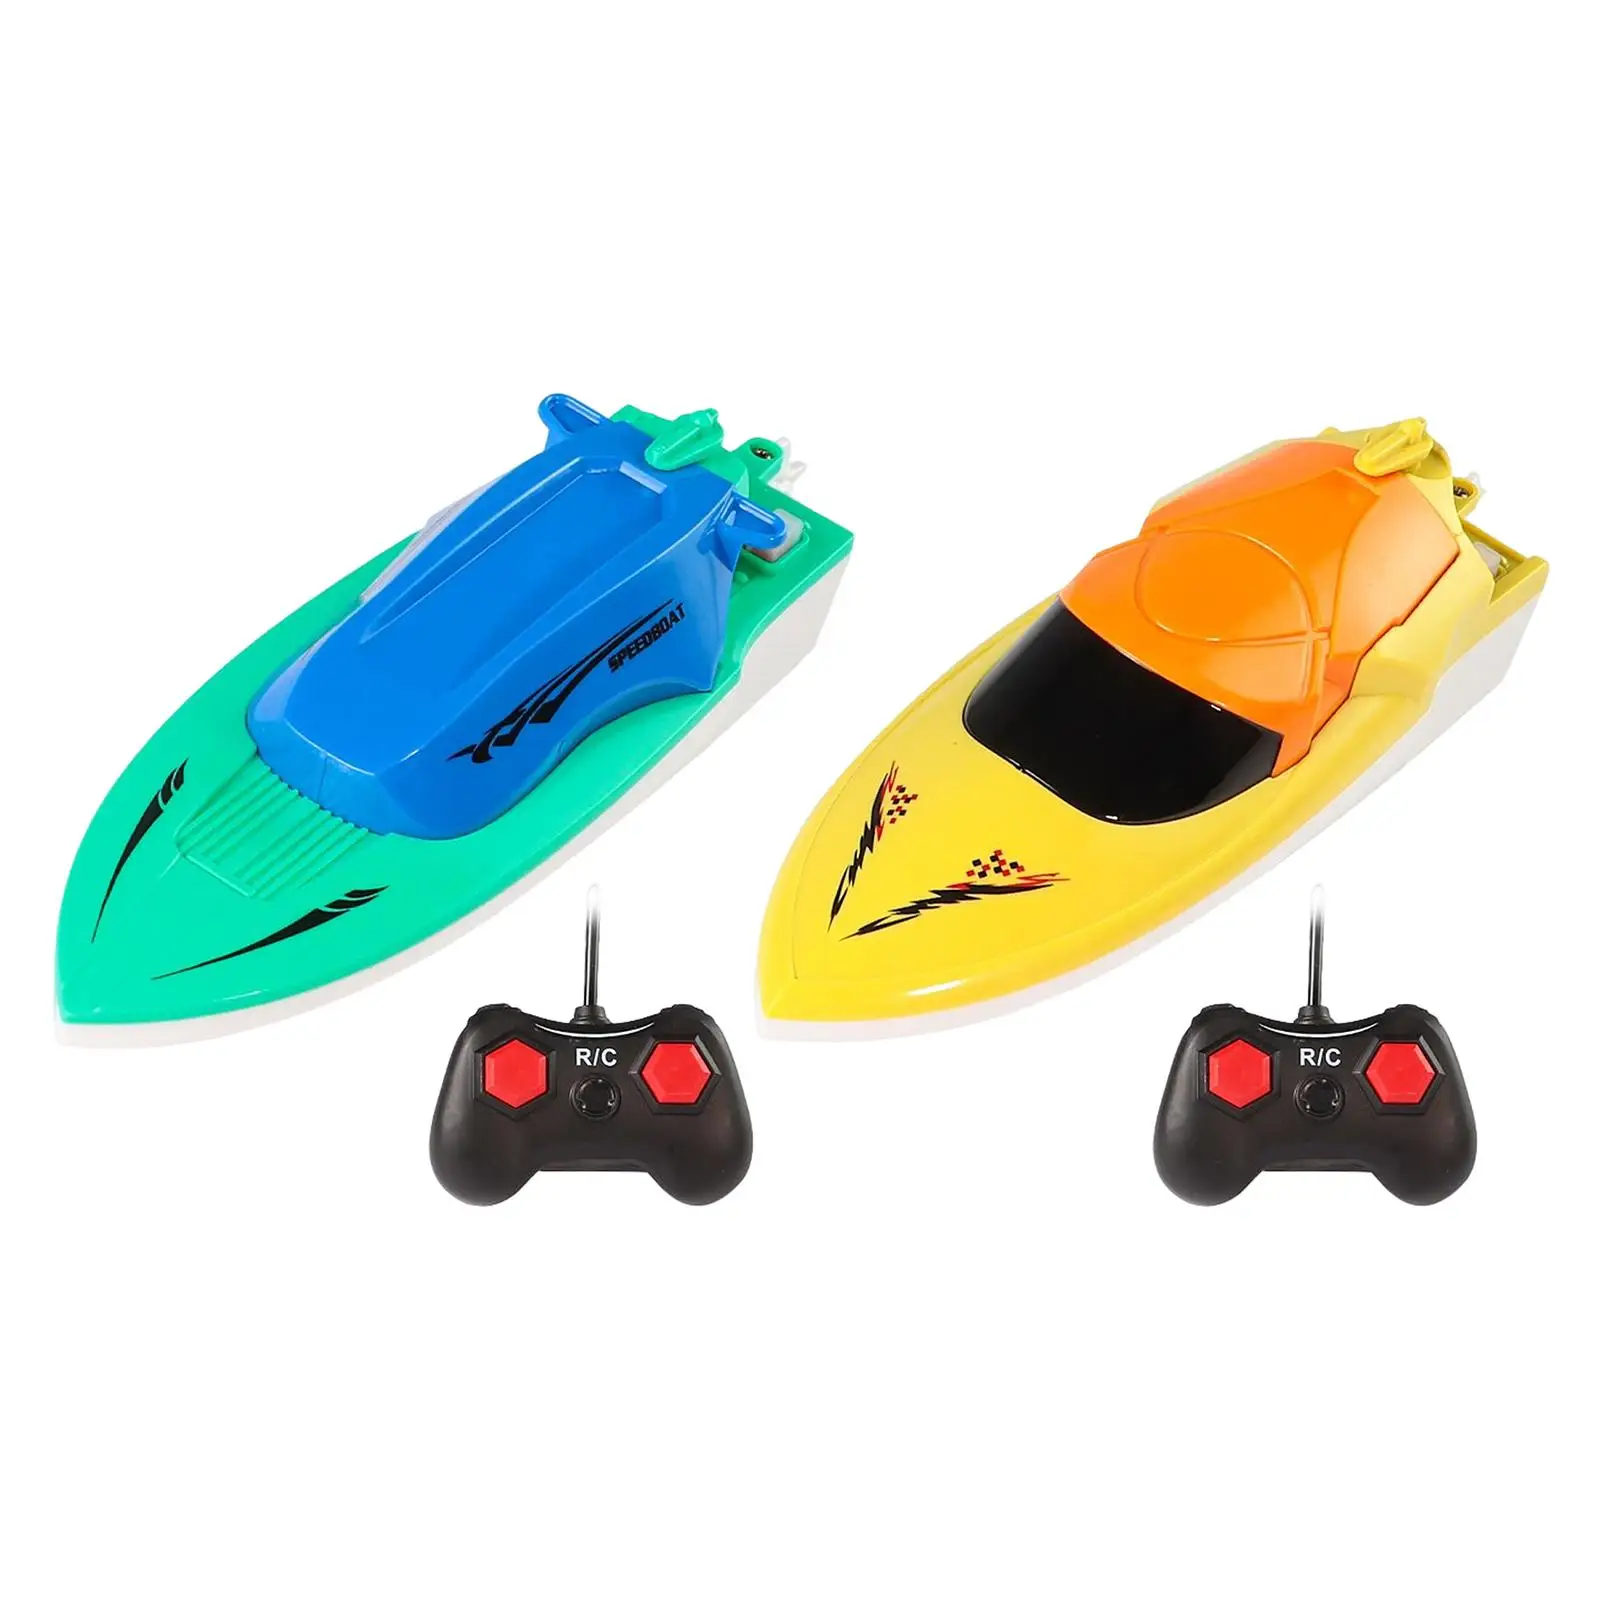 Boat Toy with Remote Control Lake Toys for Children and Adults